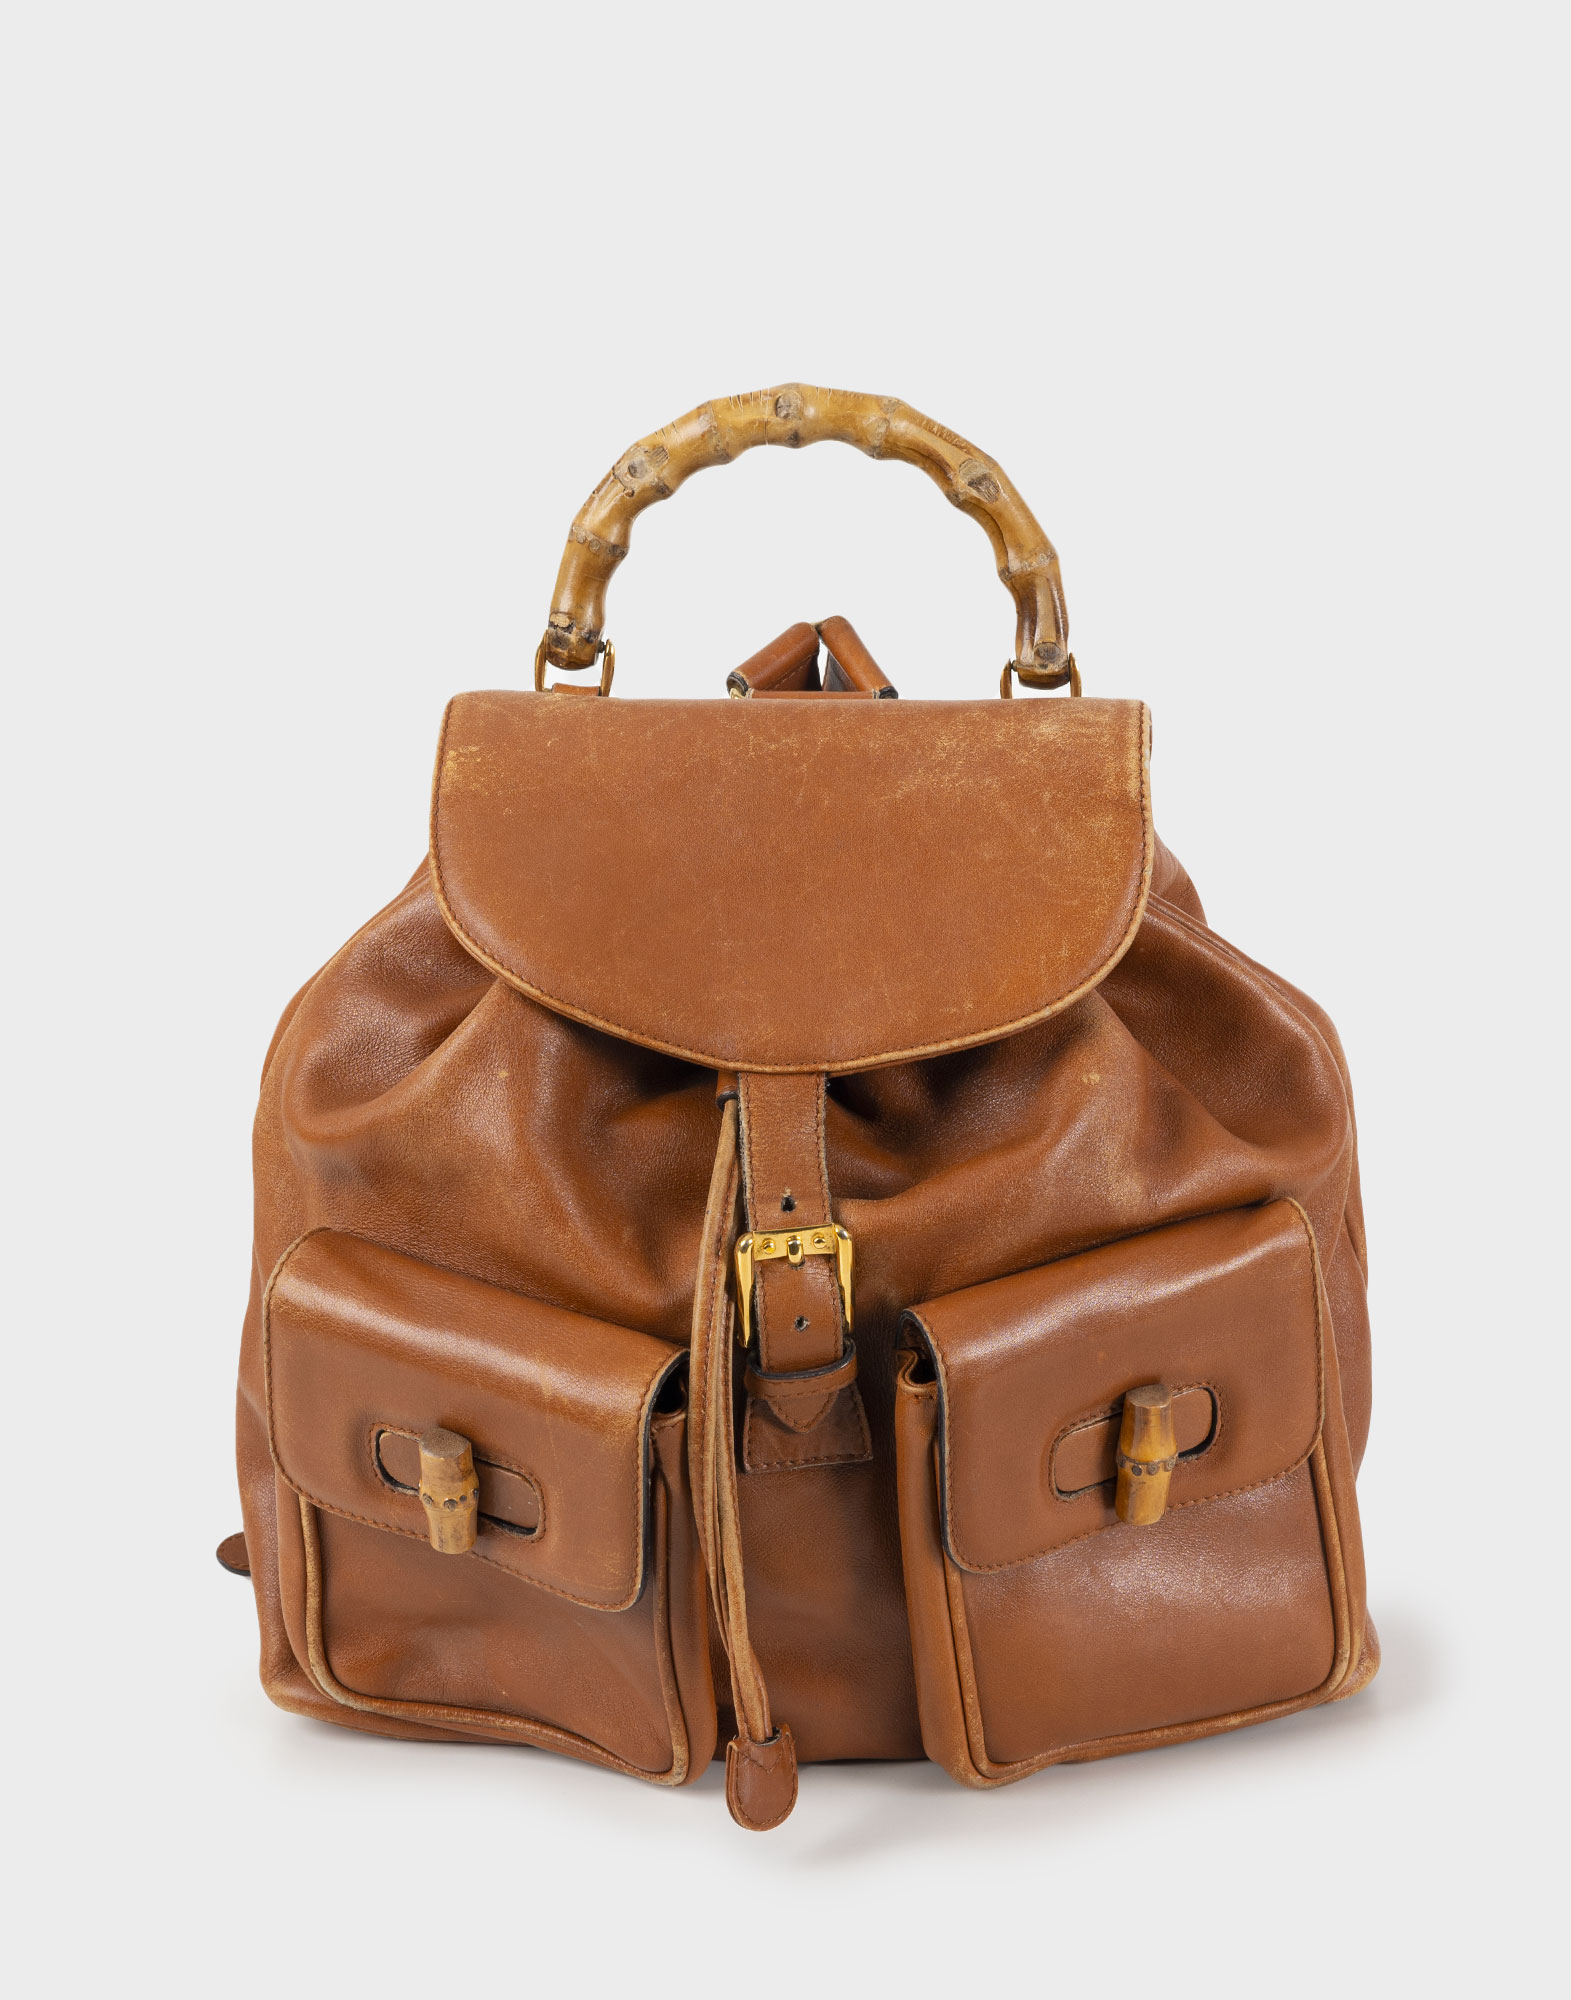 Brown leather backpack with bamboo handle and two pockets. Shot on a gray background.